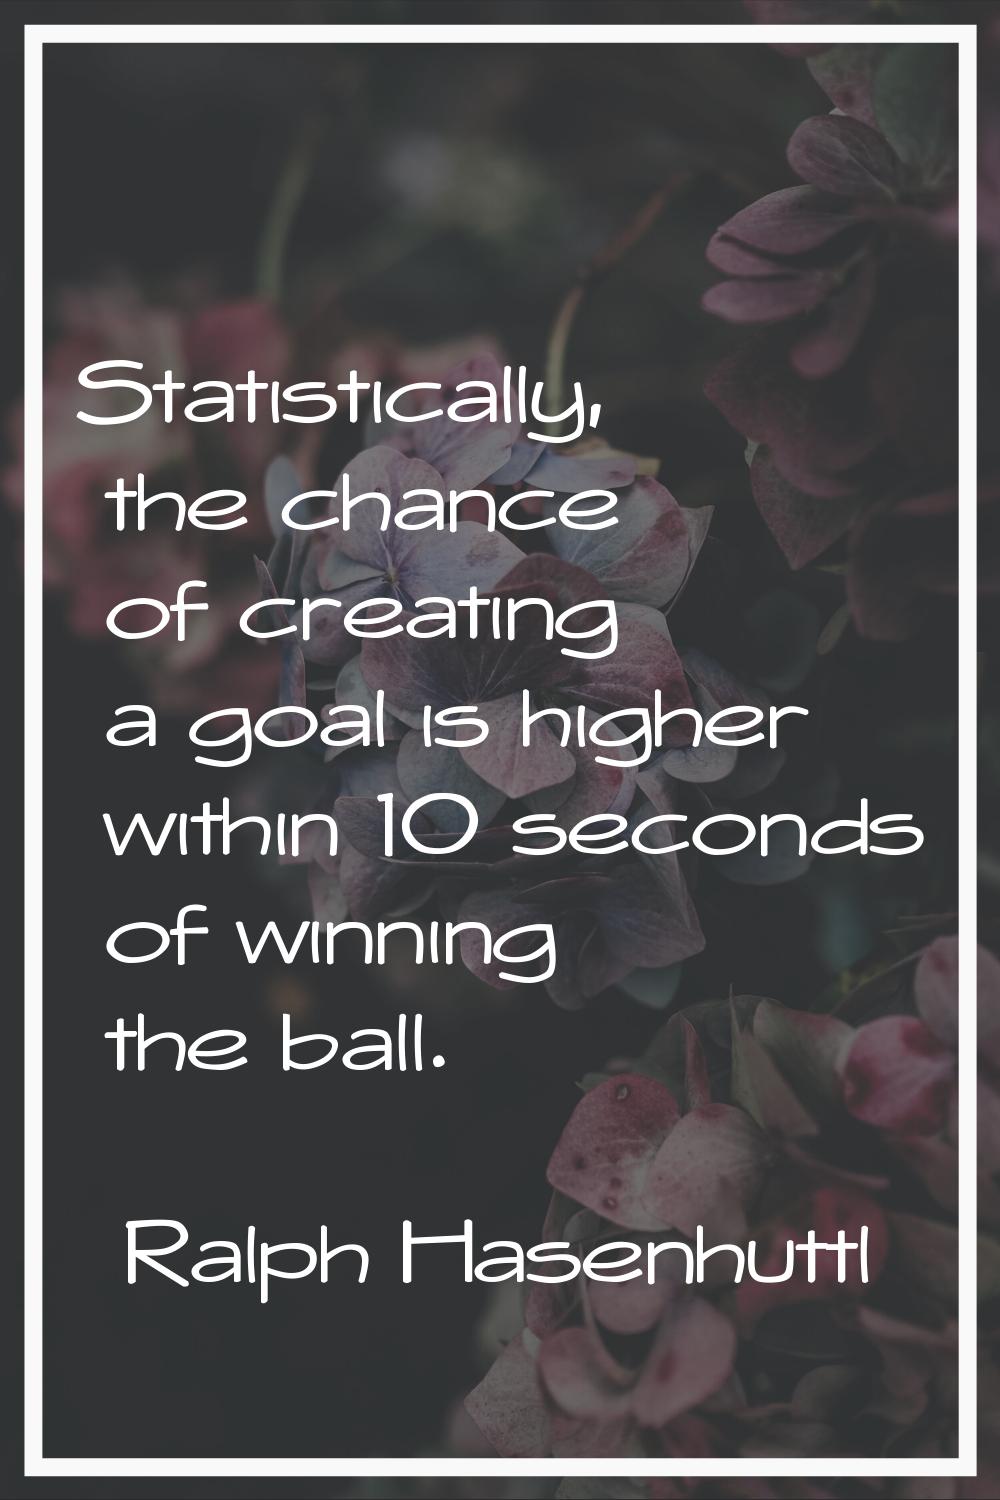 Statistically, the chance of creating a goal is higher within 10 seconds of winning the ball.